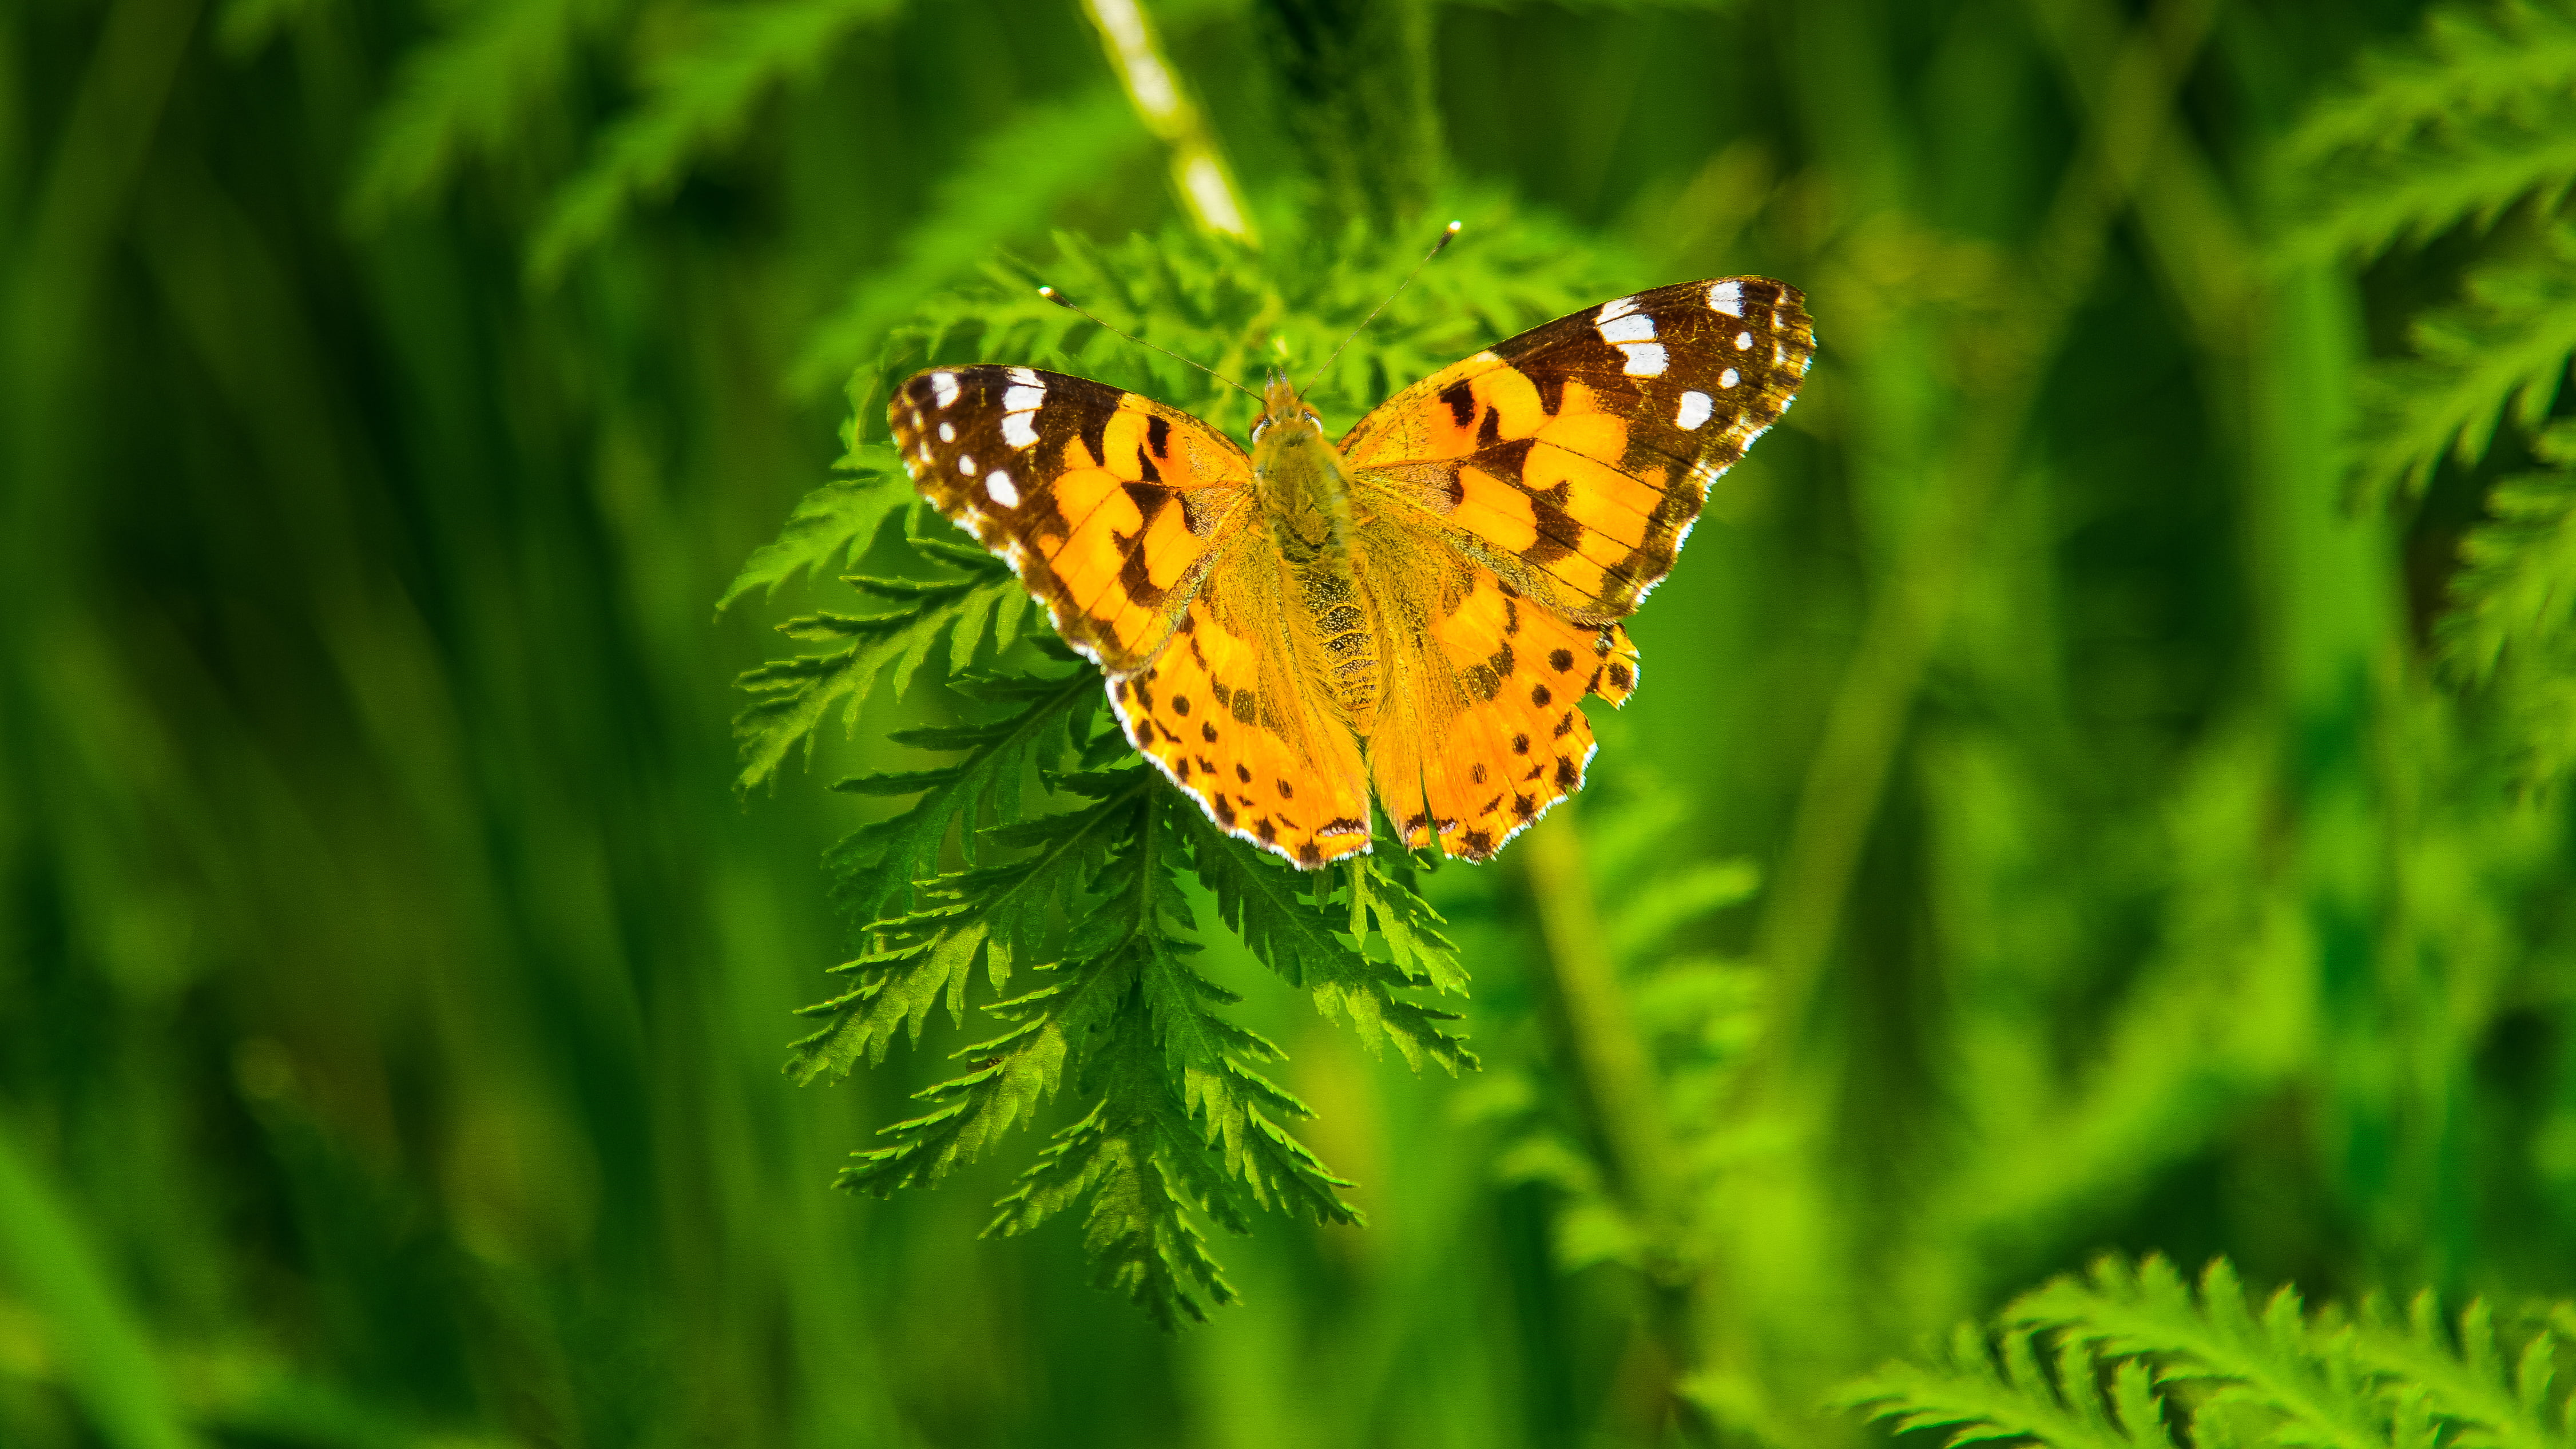 4K, Butterfly, animal wildlife, butterfly - insect, animal themes